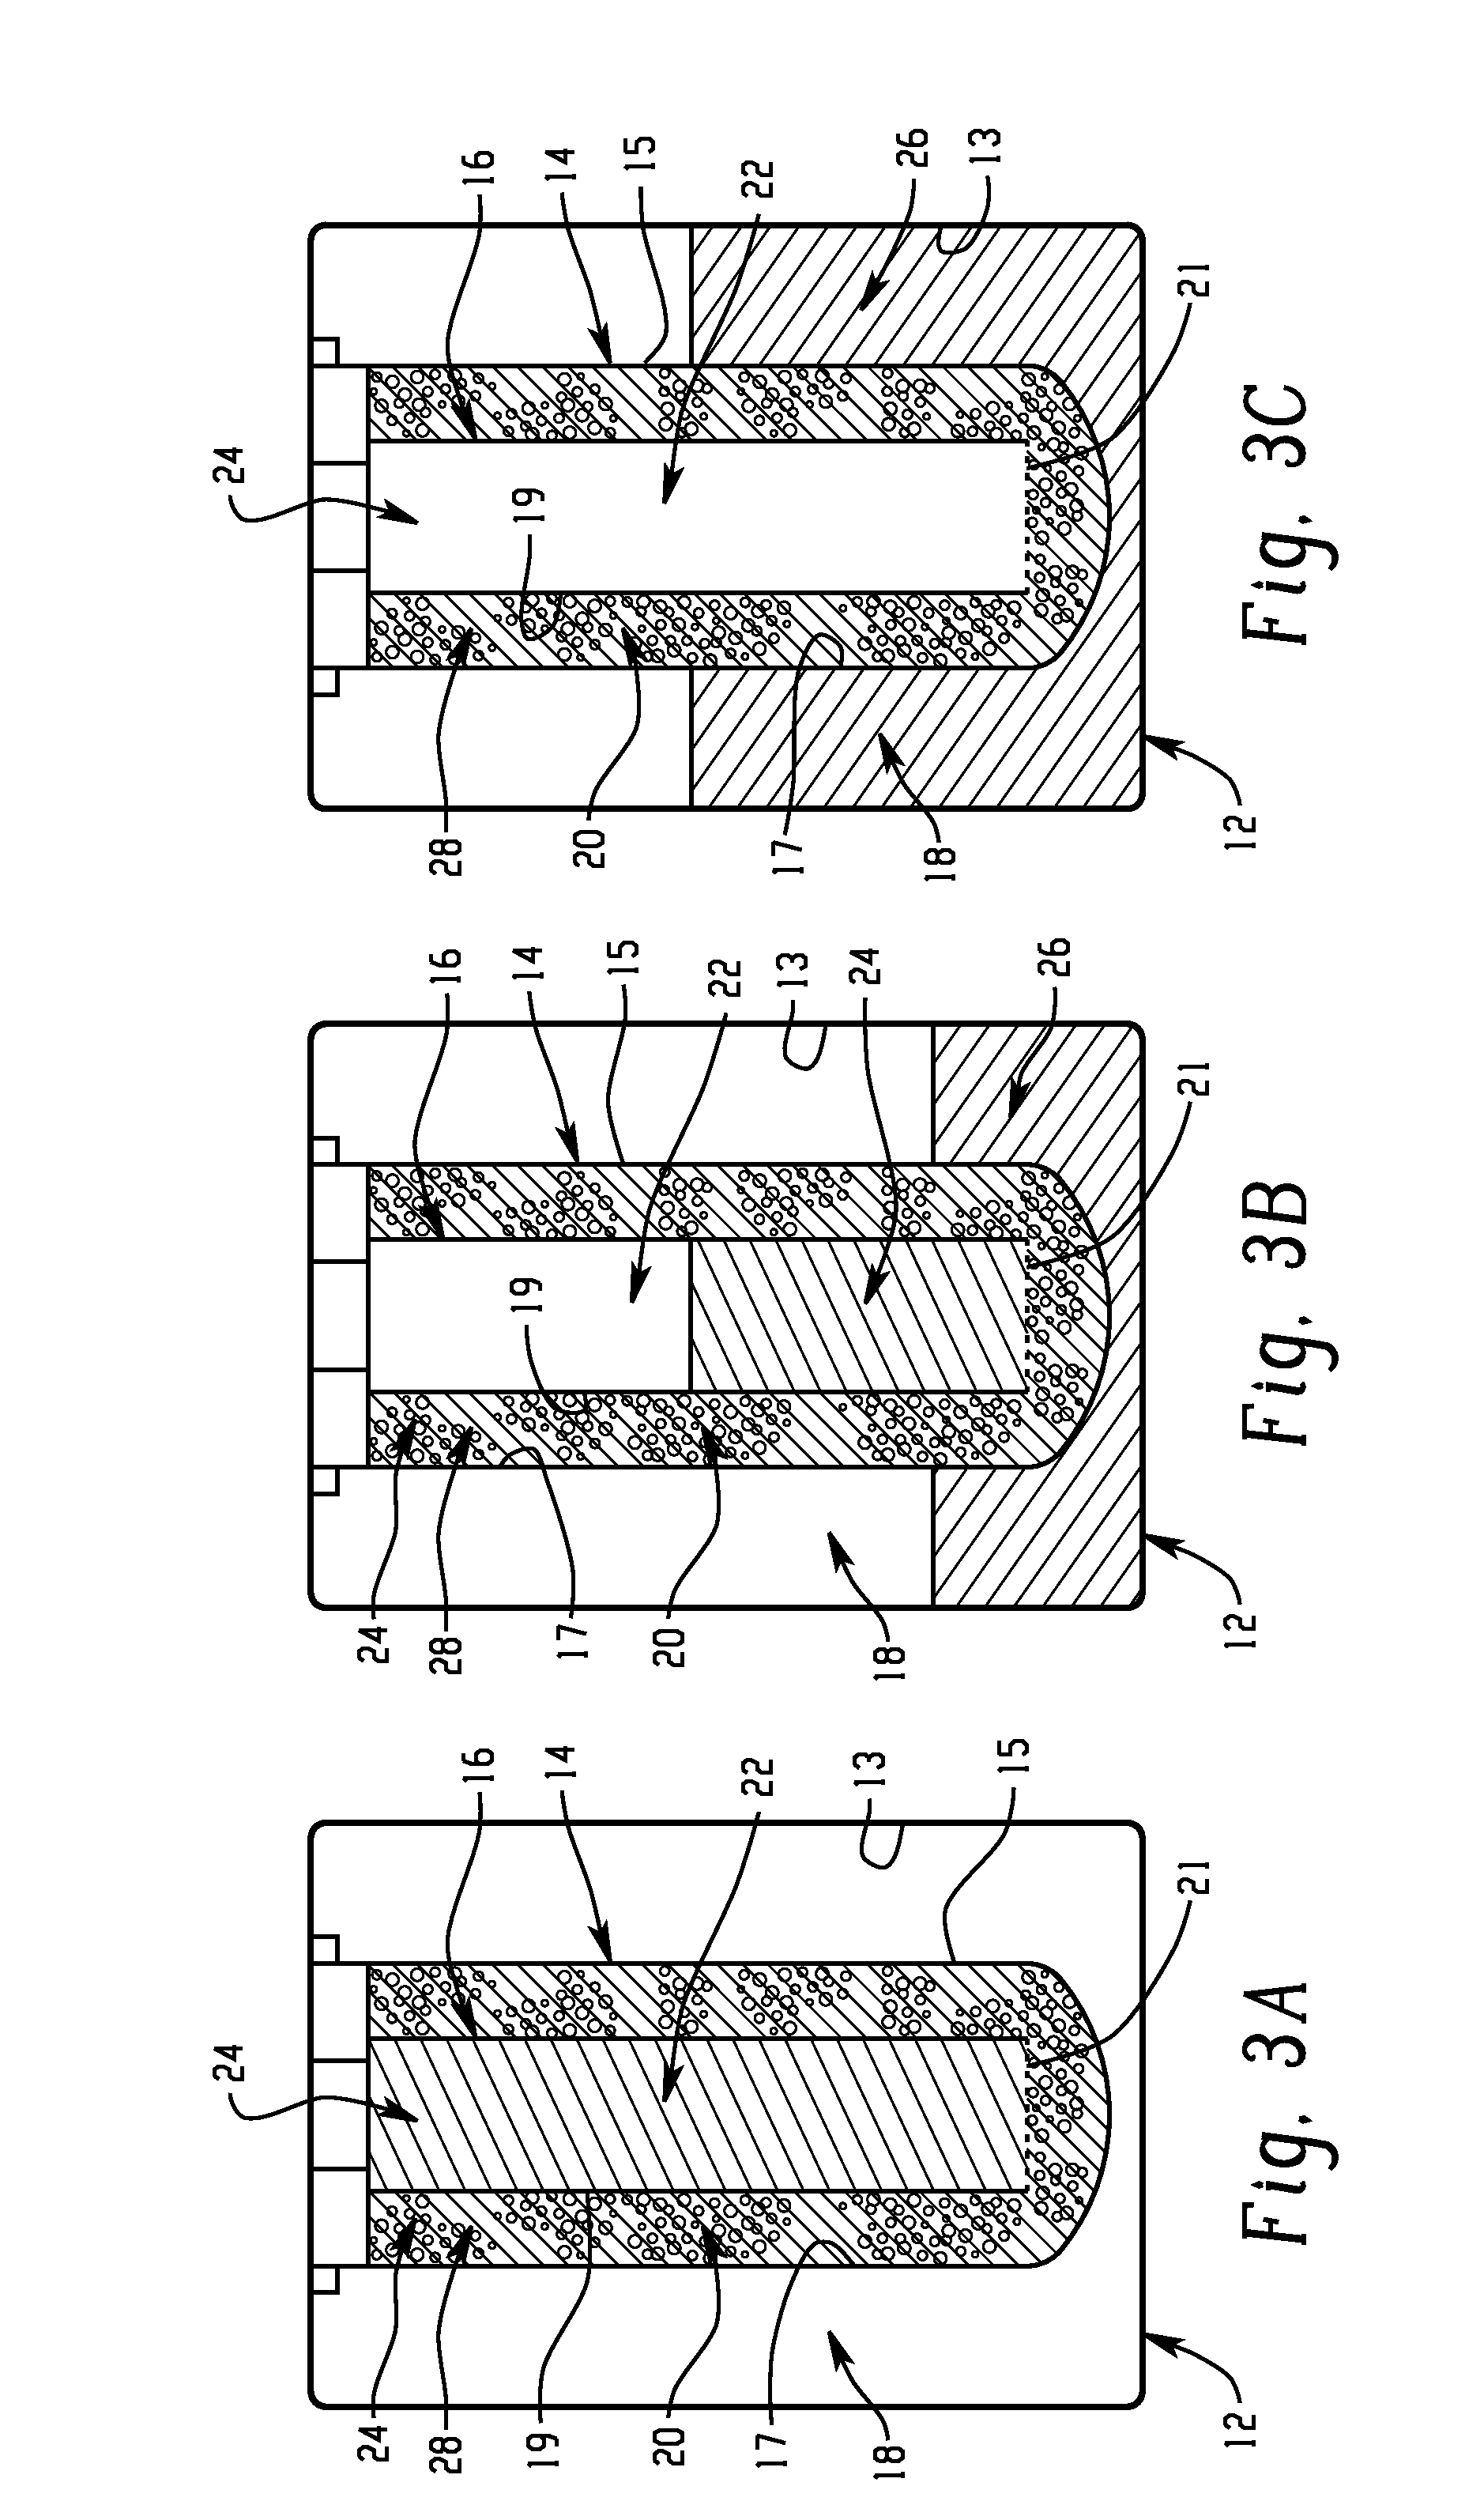 Energy storage device and associated method